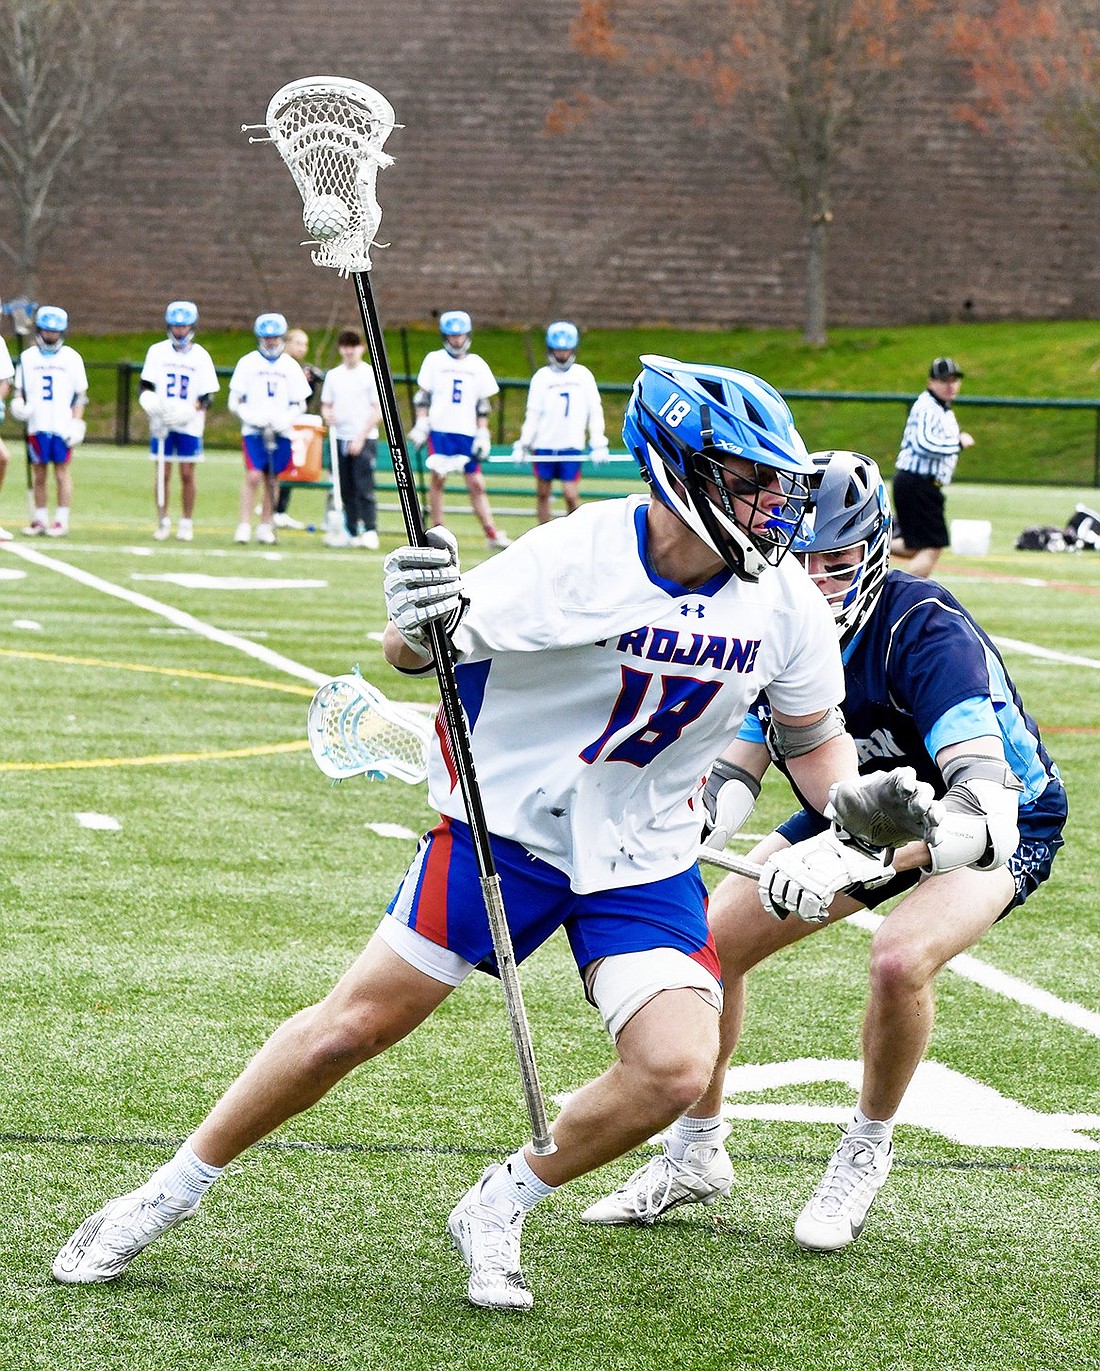 Senior captain and Muhlenberg lacrosse commit Seth Low maneuvers around Suffern to pass the ball during the Trojans’ Friday, Apr. 19 home win over the Mounties.